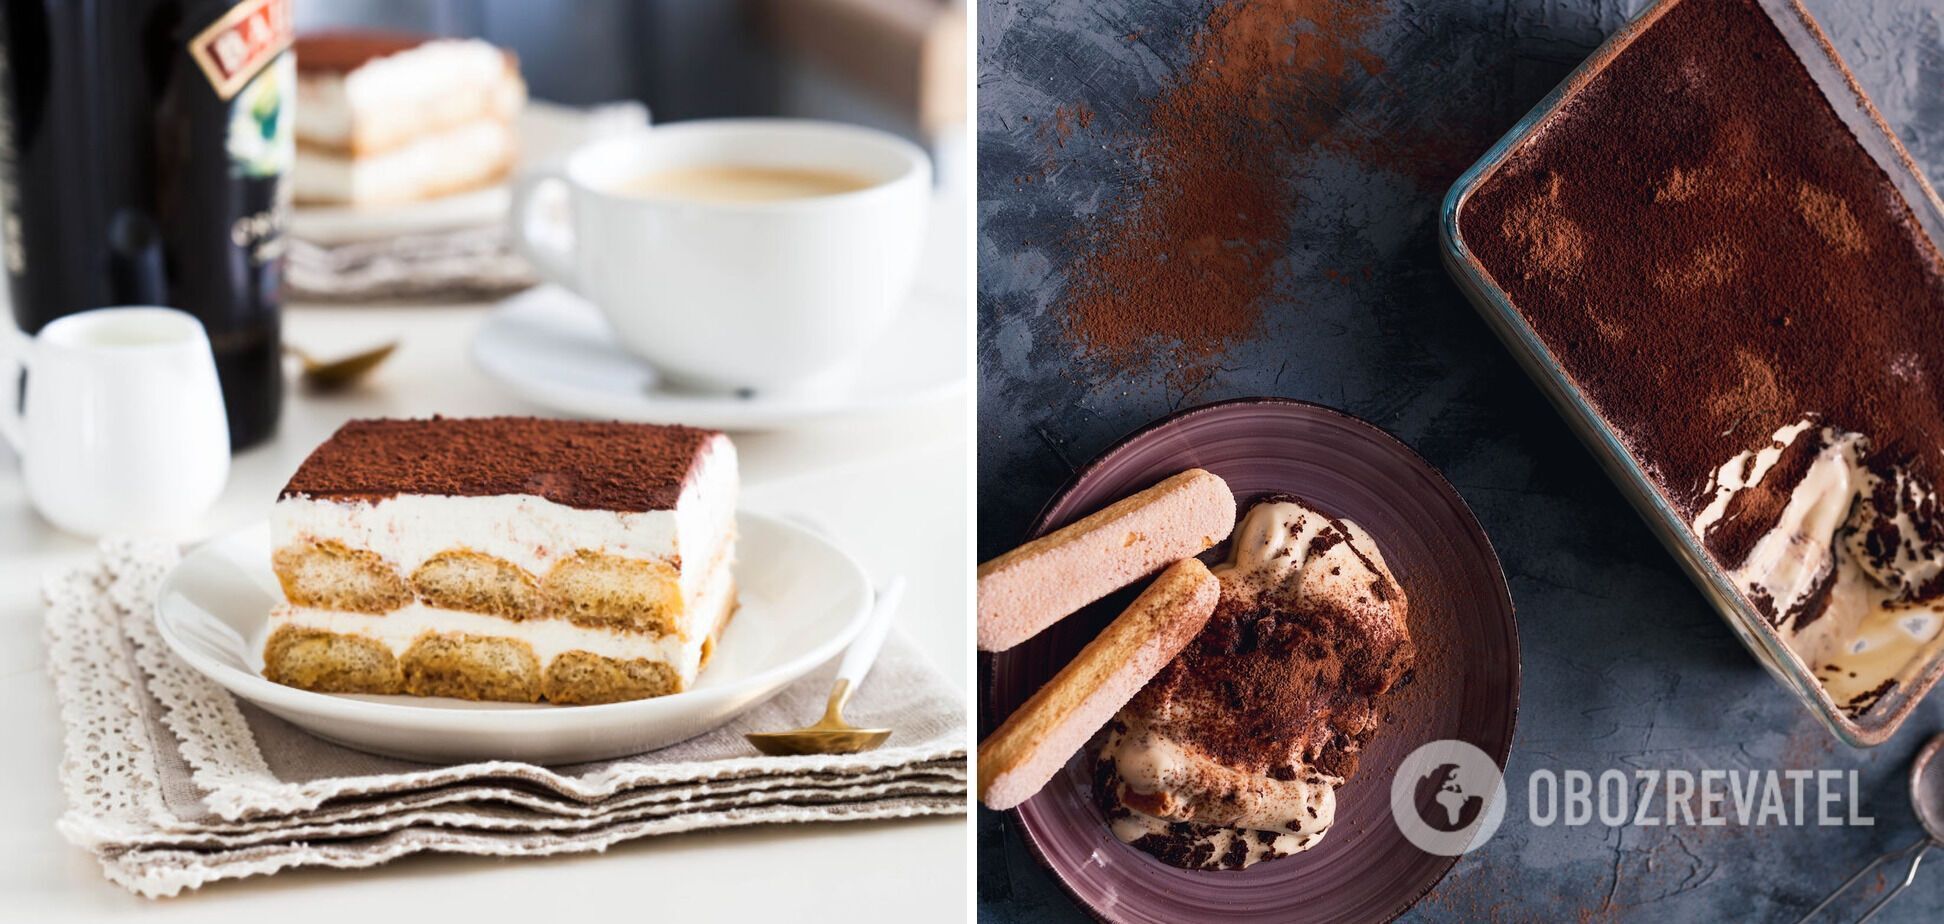 How to make tiramisu without eggs: the original taste is not lost